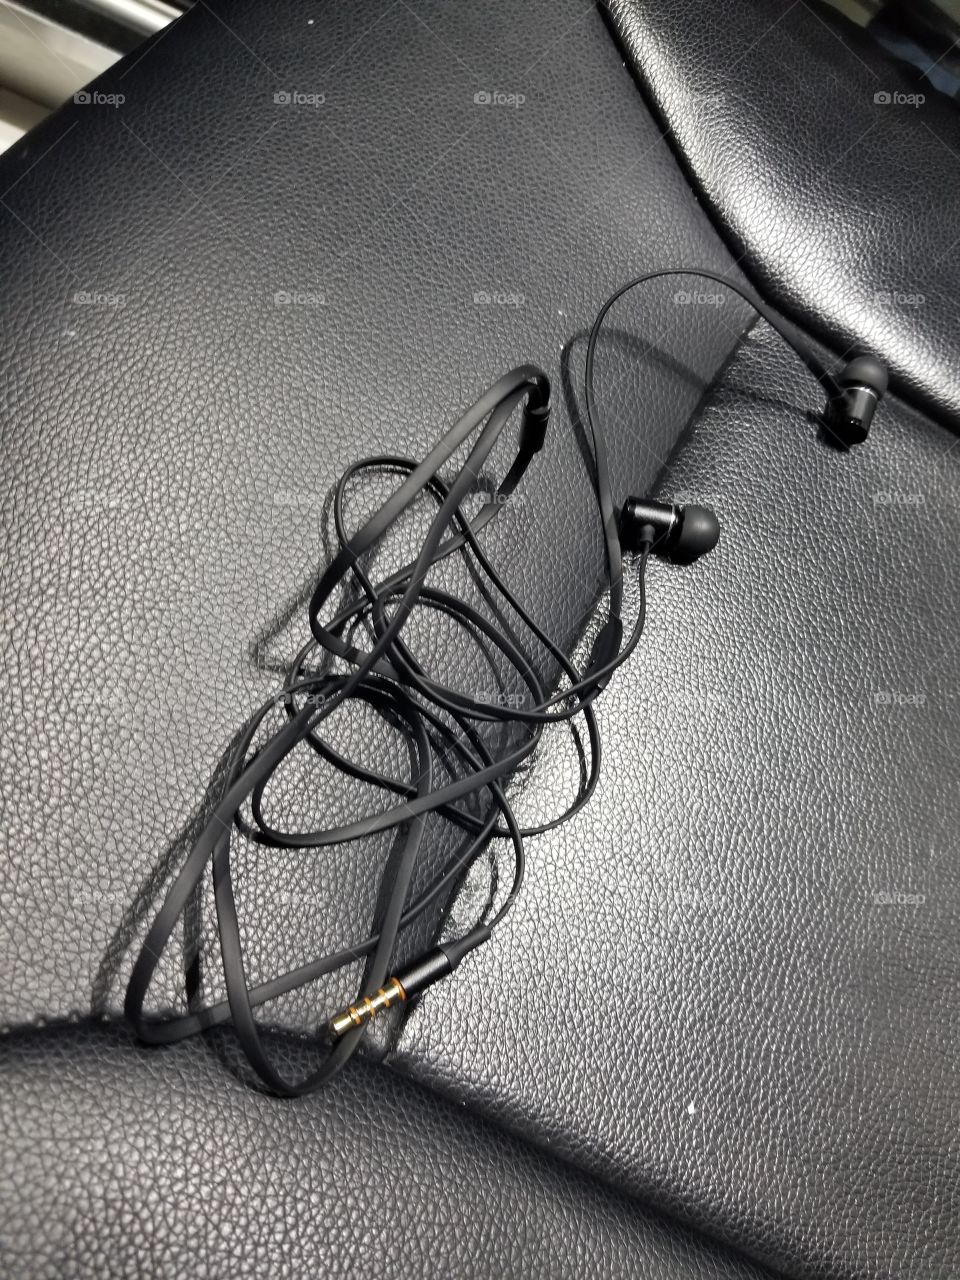 Aaah messed up earphones, A struggle for all of us